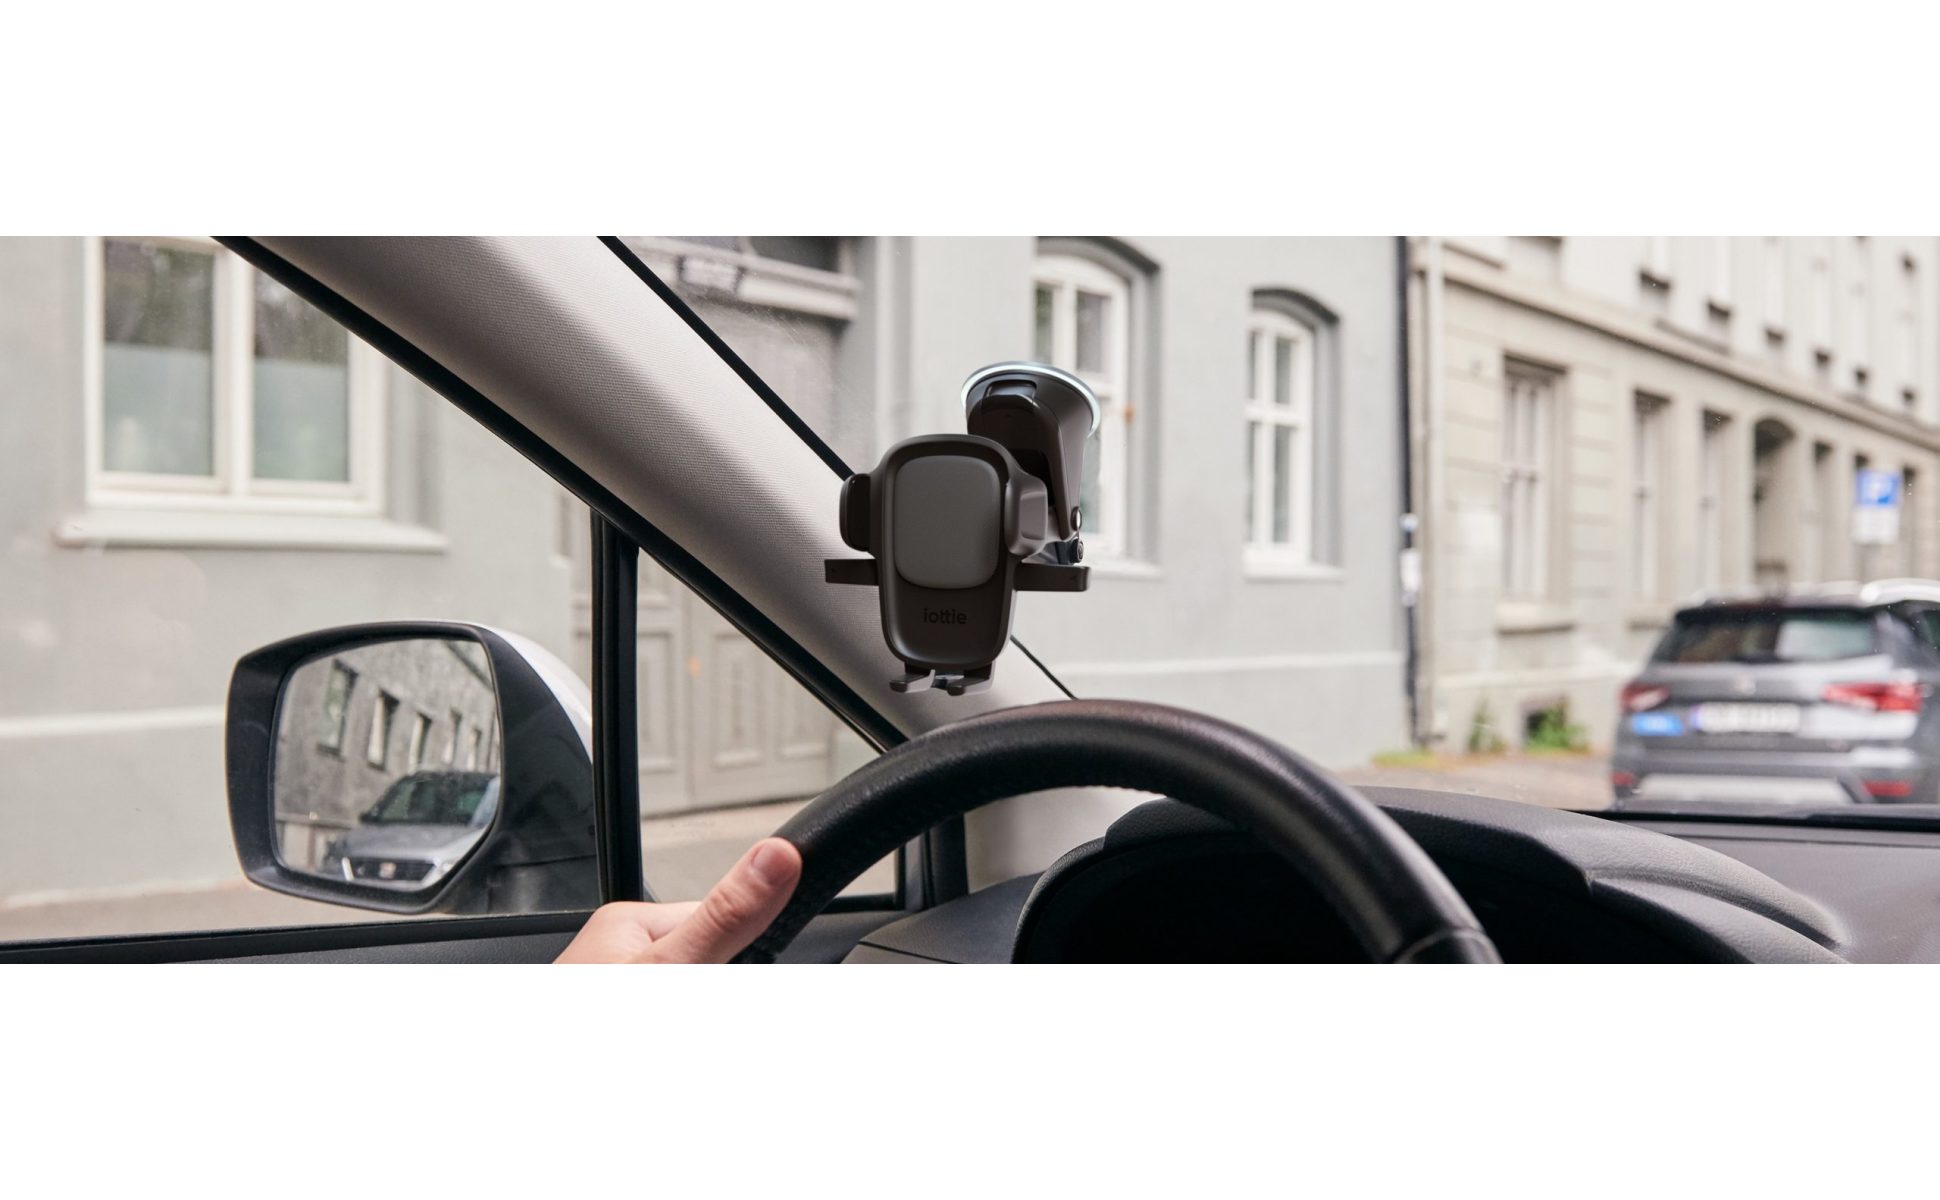 iOttie Easy One Touch 5 Dashboard & Windshield Universal Car Mount Phone  Holder Desk Stand with Suction Cup Base and Telescopic Arm for iPhone